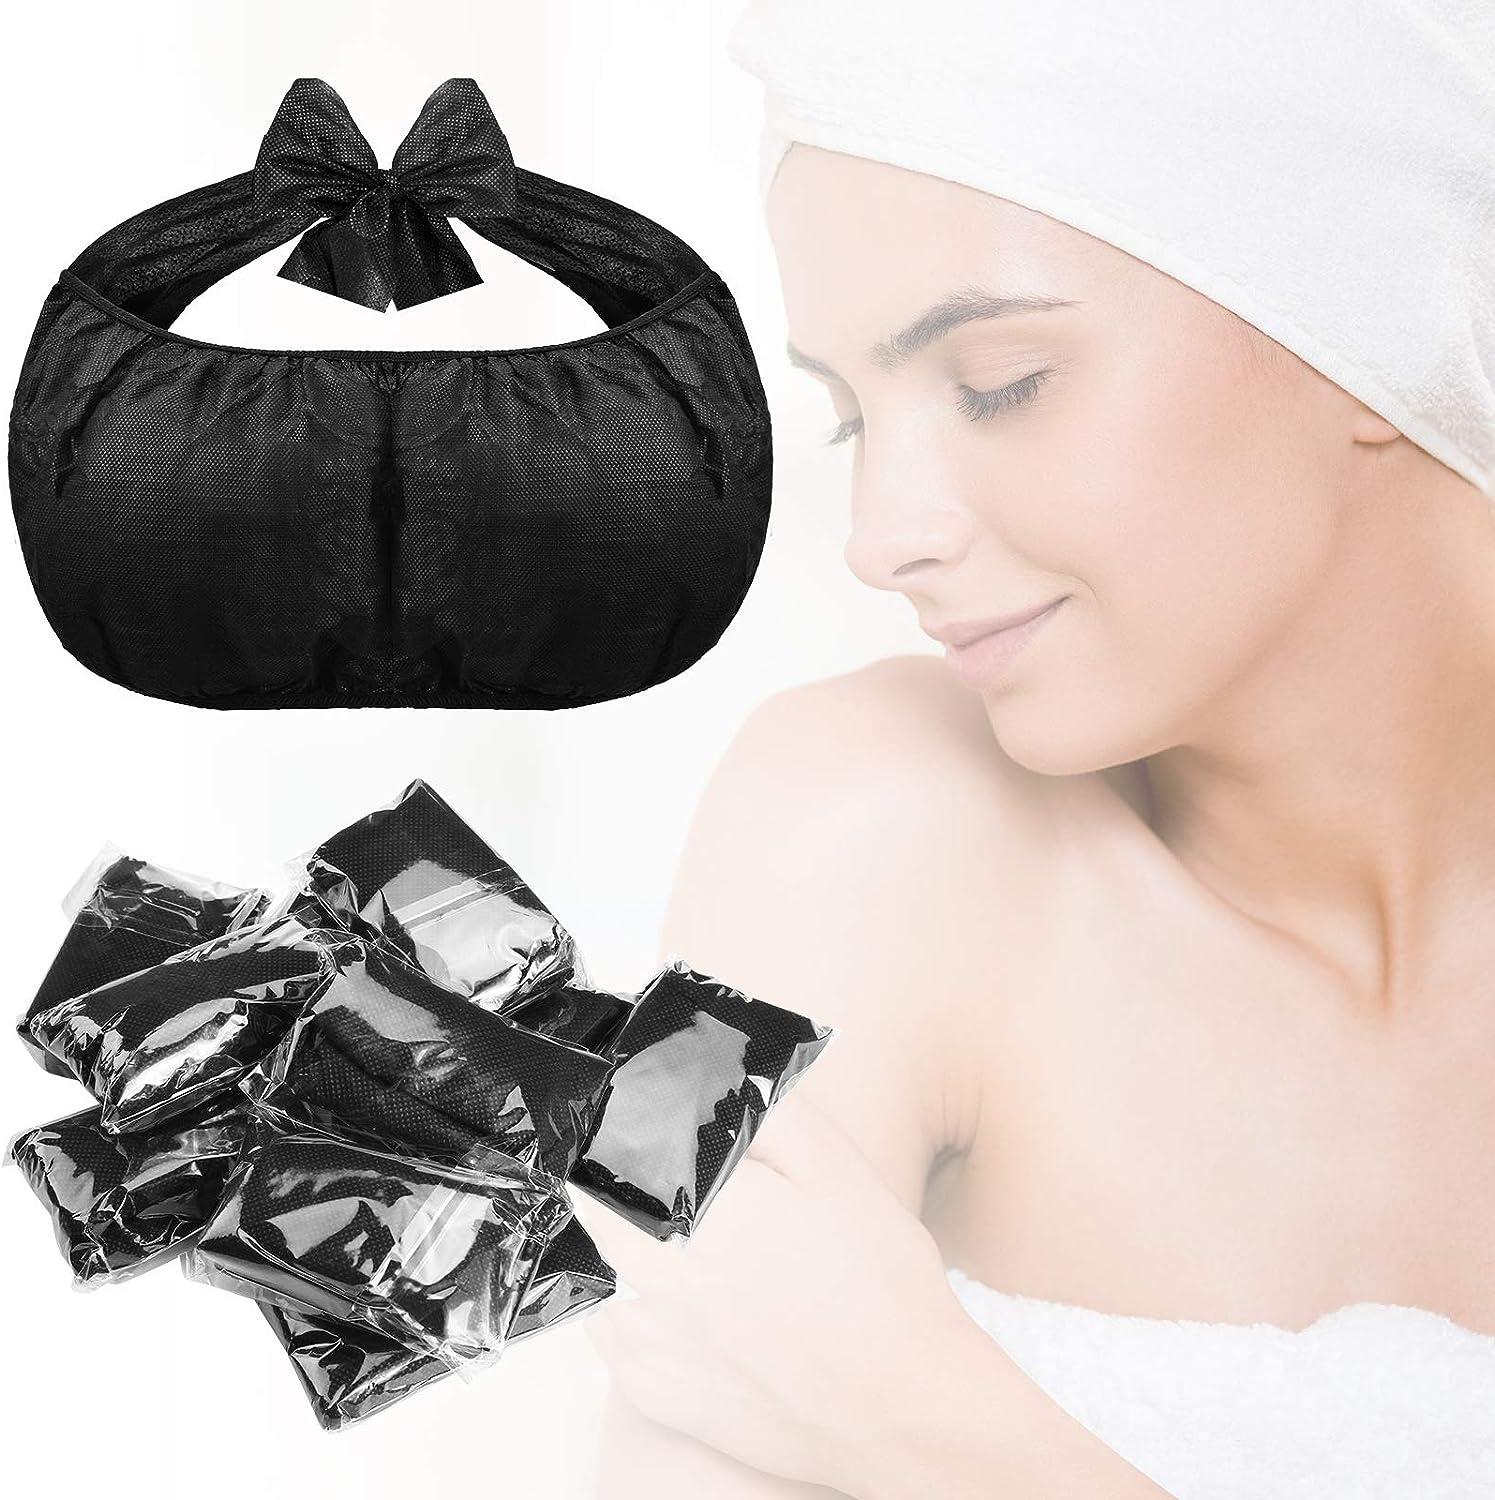 50x Disposable Bra Spa Beauty Salon Top Brassieres For Spray Tanning Black  EMB